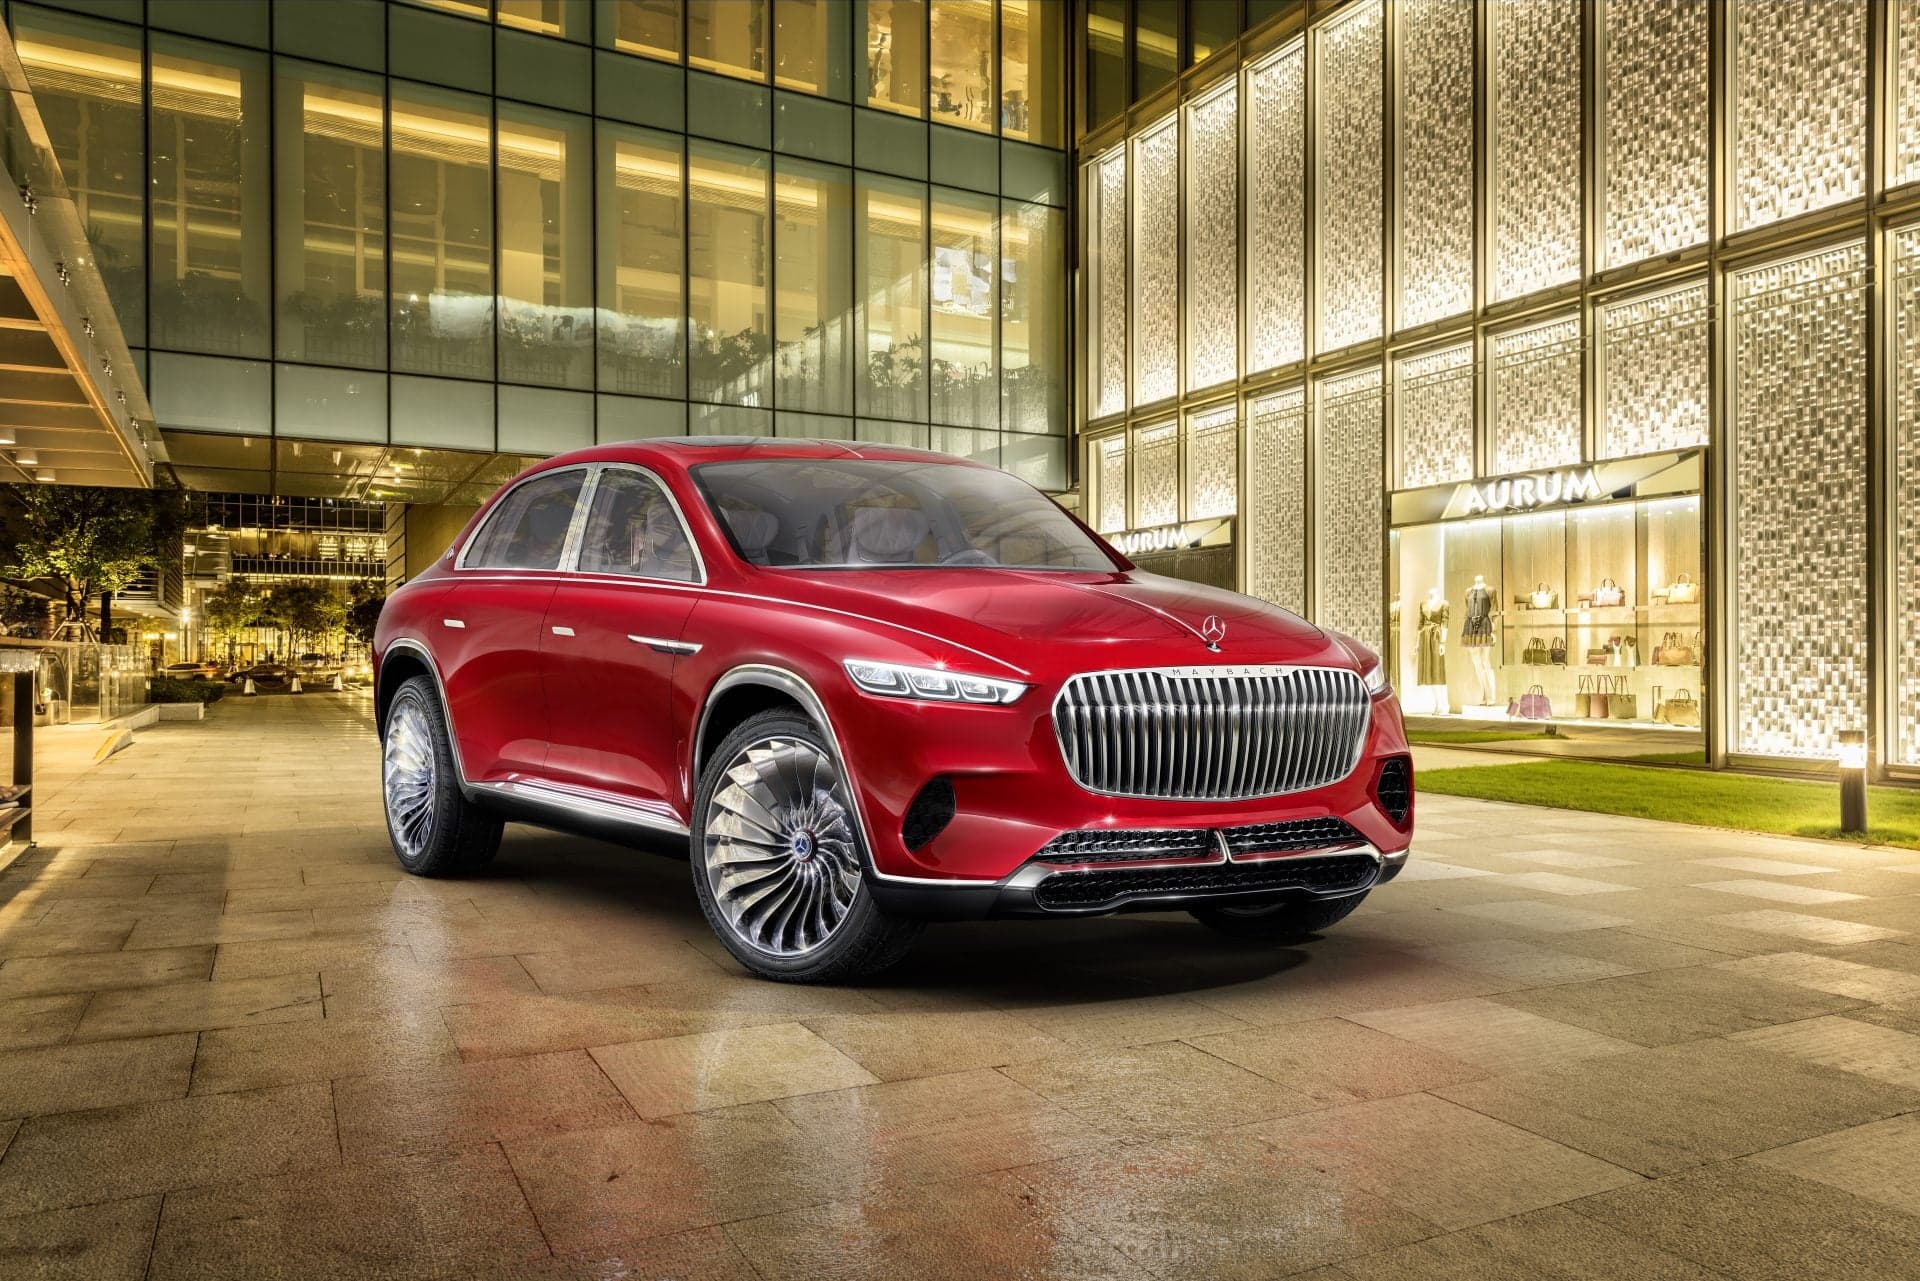 Vision Mercedes-Maybach Ultimate Luxury Shown off in Beijing